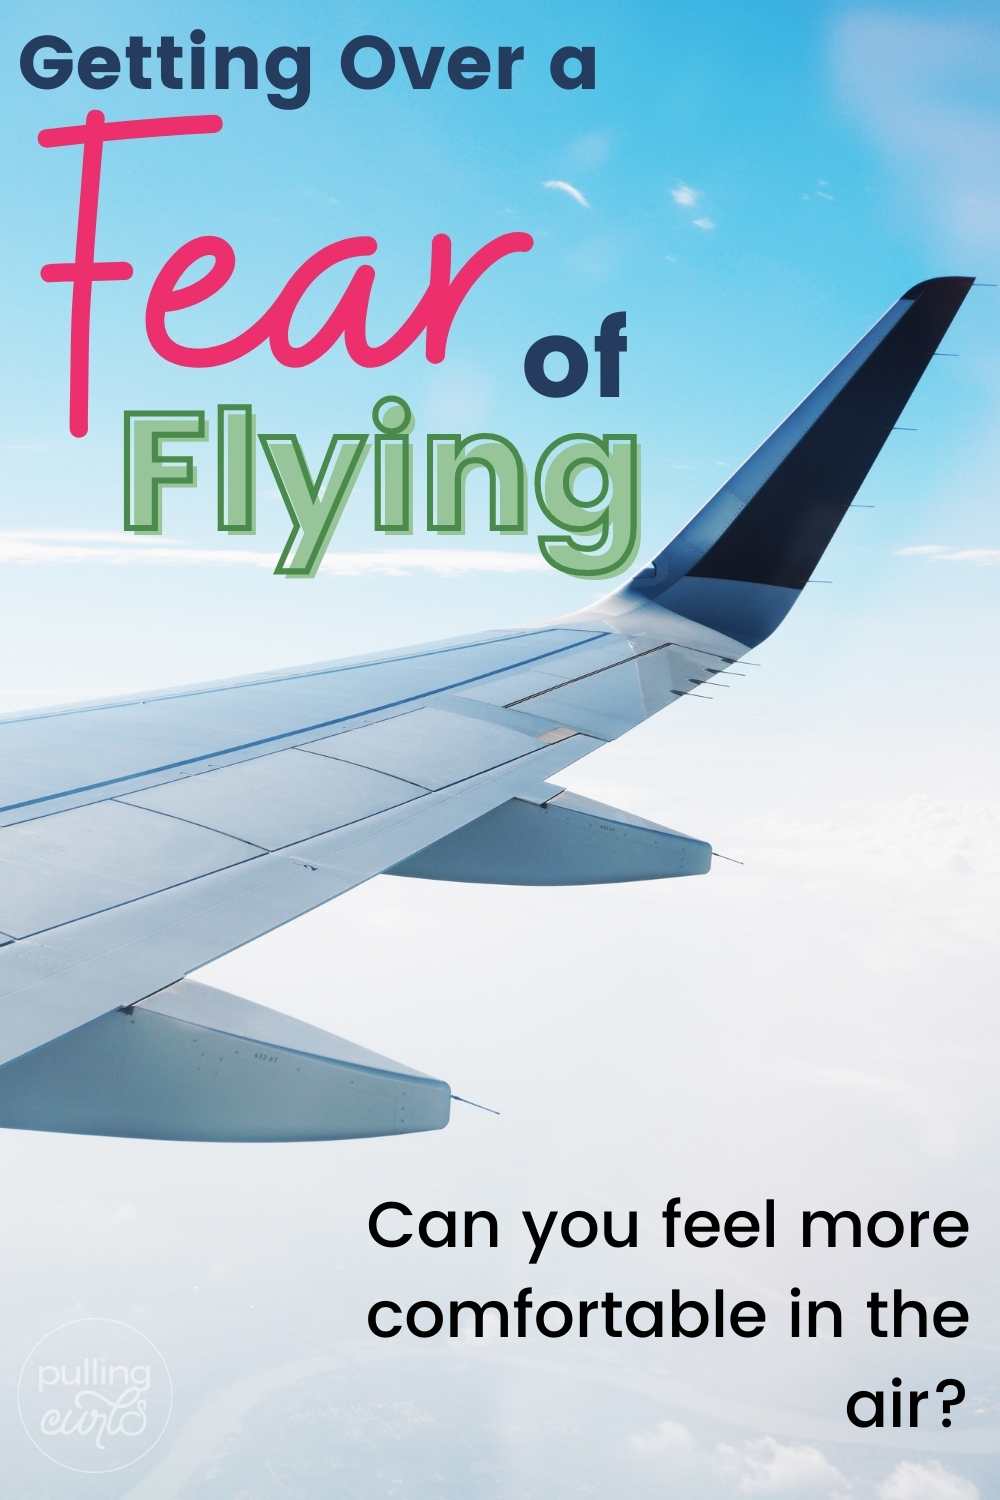 Today we're talking about how I got over my fear of flying and am able to do it mostly stress free at this point. via @pullingcurls